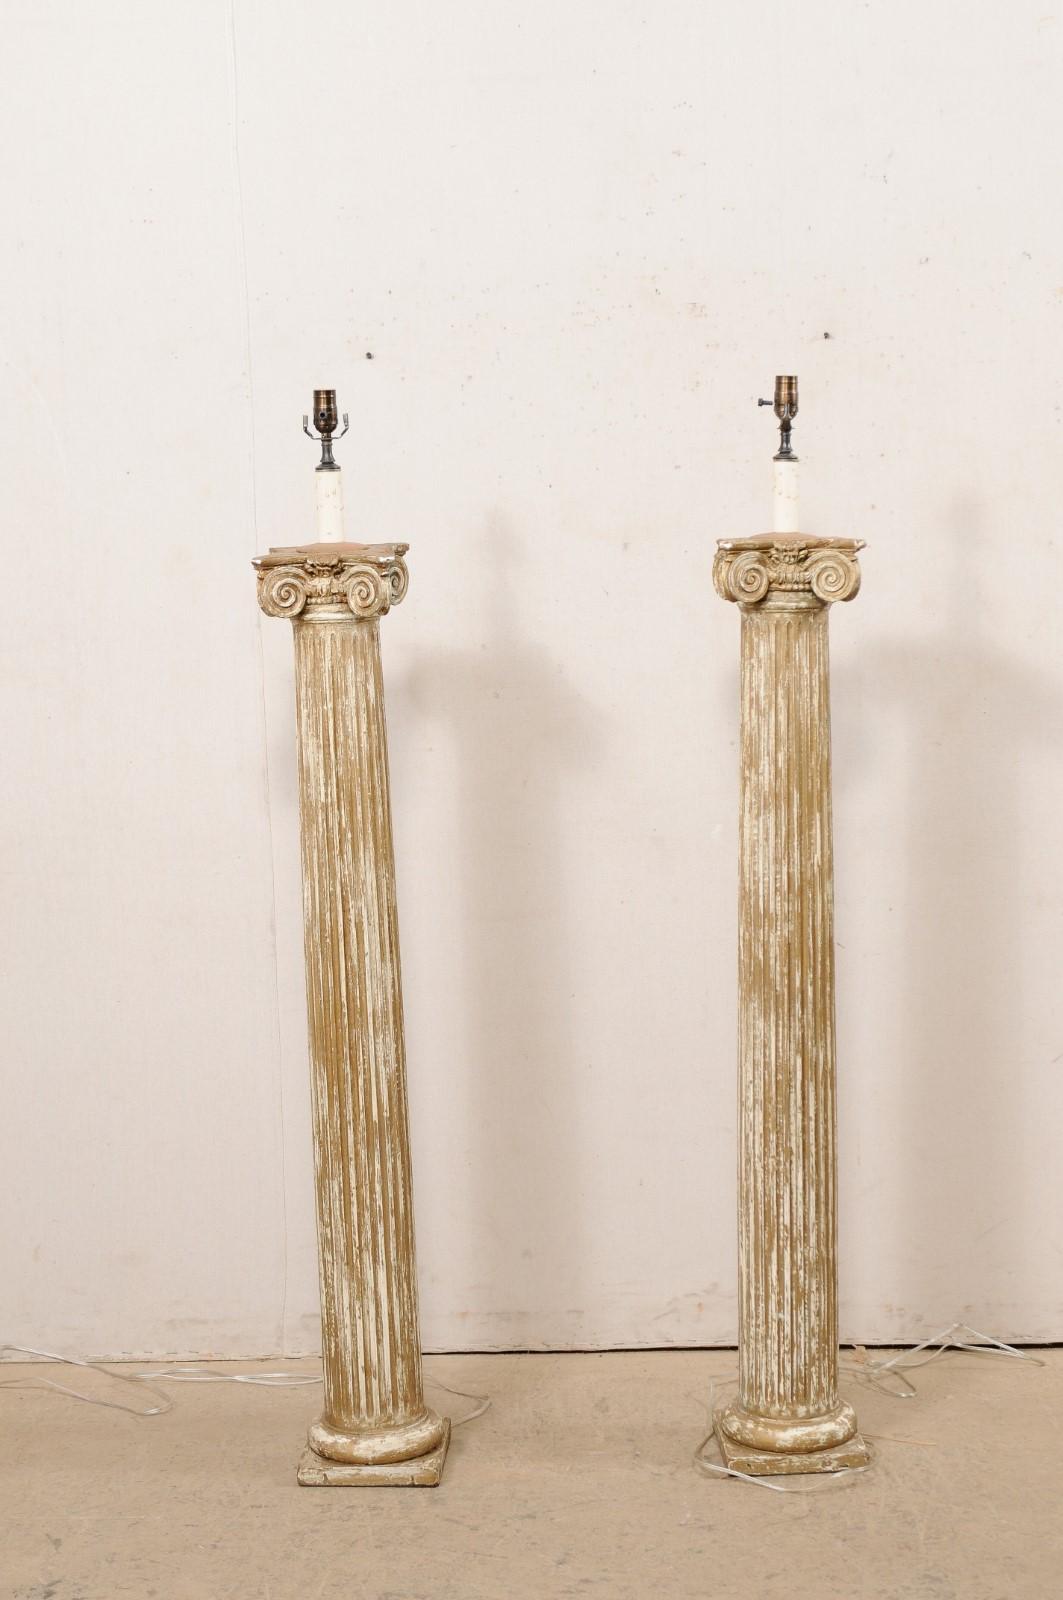 A French pair of single-light floor lamps created from 19th century ionic columns. This lovely pair of floor lamps from France have each been fashioned from antique ionic columns, with rounded and flute-carved bodies, with scrolling upper